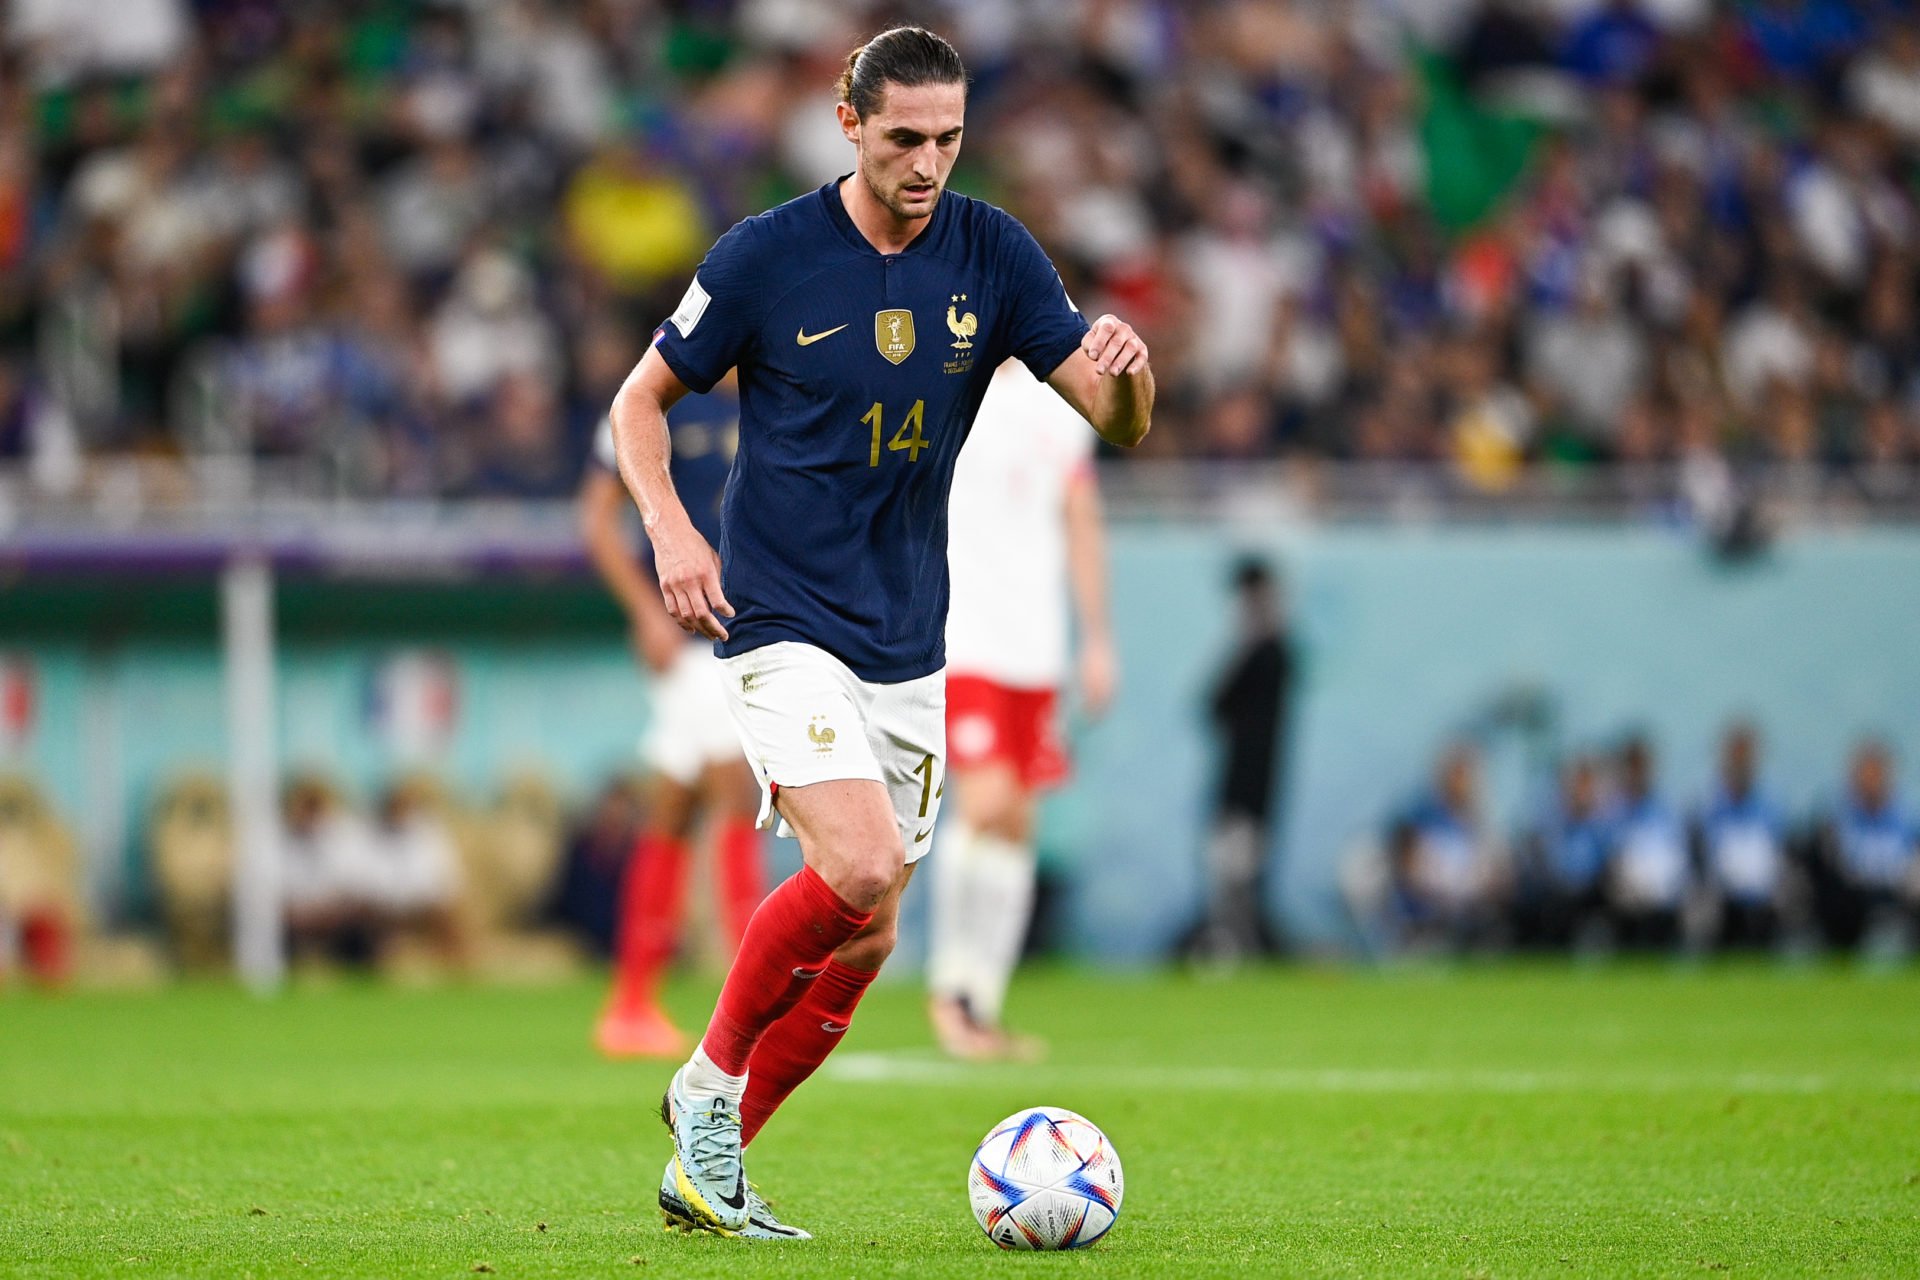 Newcastle closely monitoring Rabiot